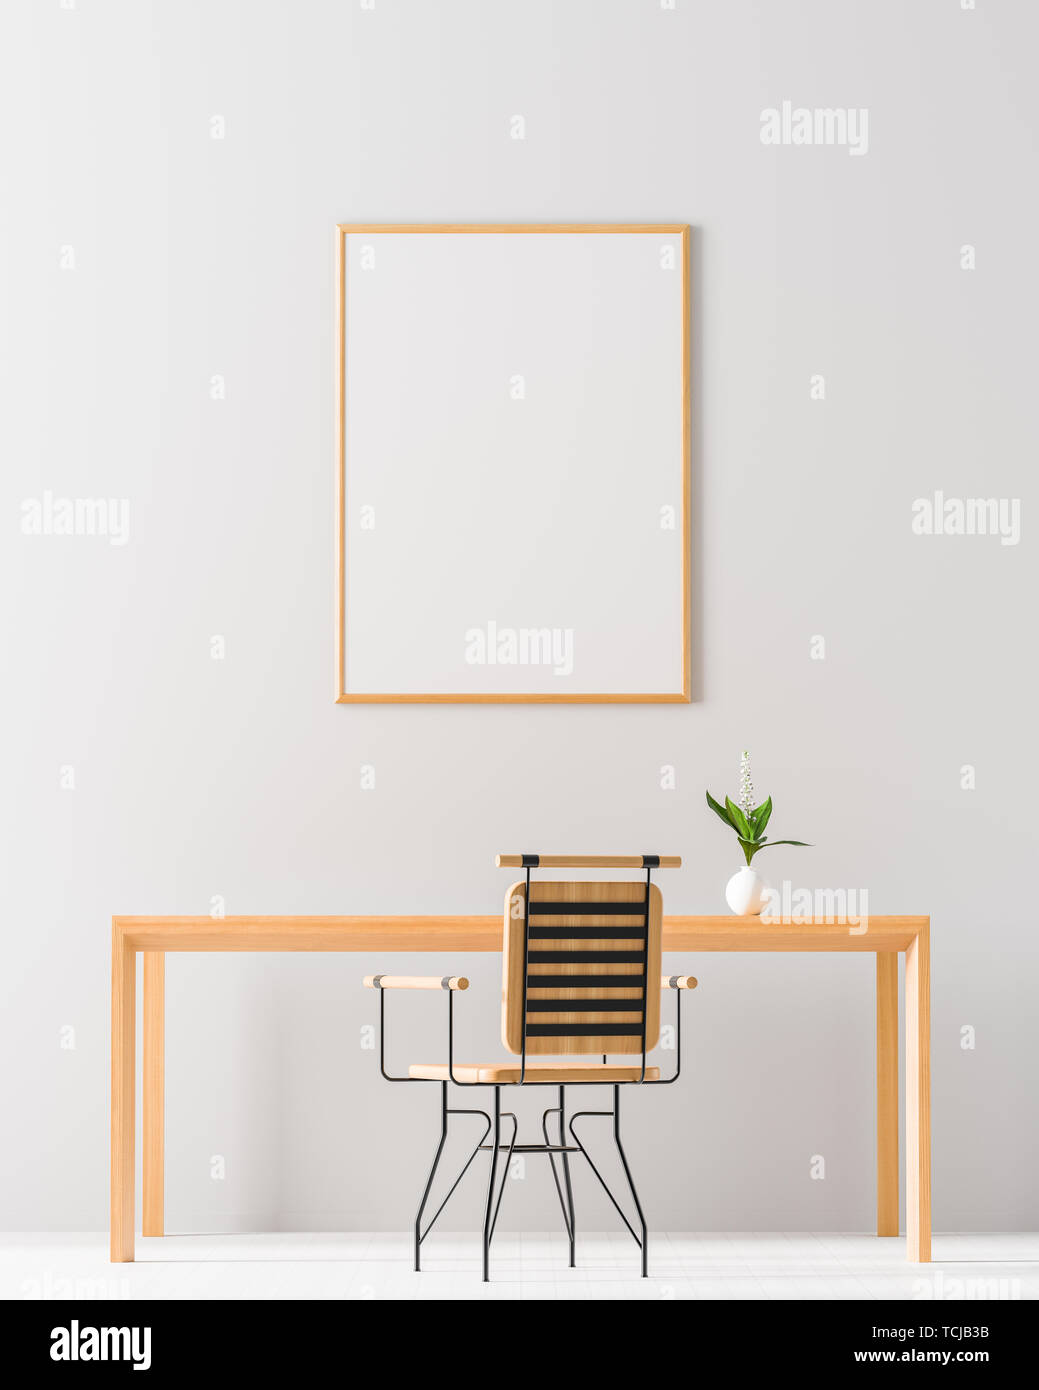 Mock up poster frame in minimalist workspace. Minimalist room design with wooden table and chair. 3D illustration. Stock Photo